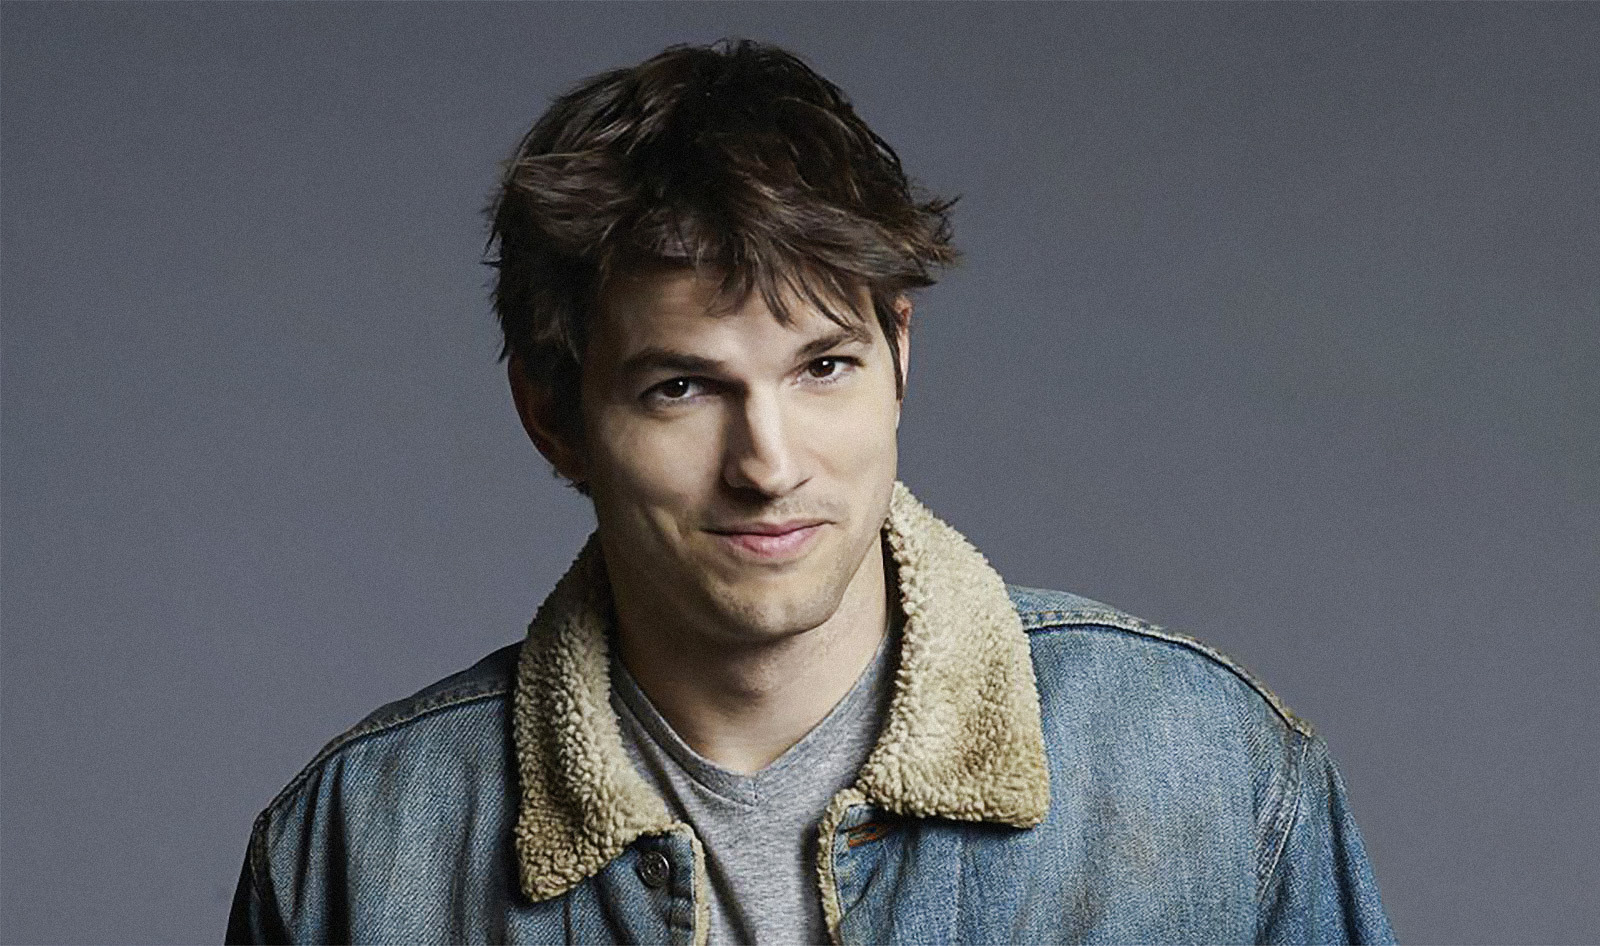 I’m Vegan, But This Ashton Kutcher-Backed Cultivated Meat Made Me Think Twice